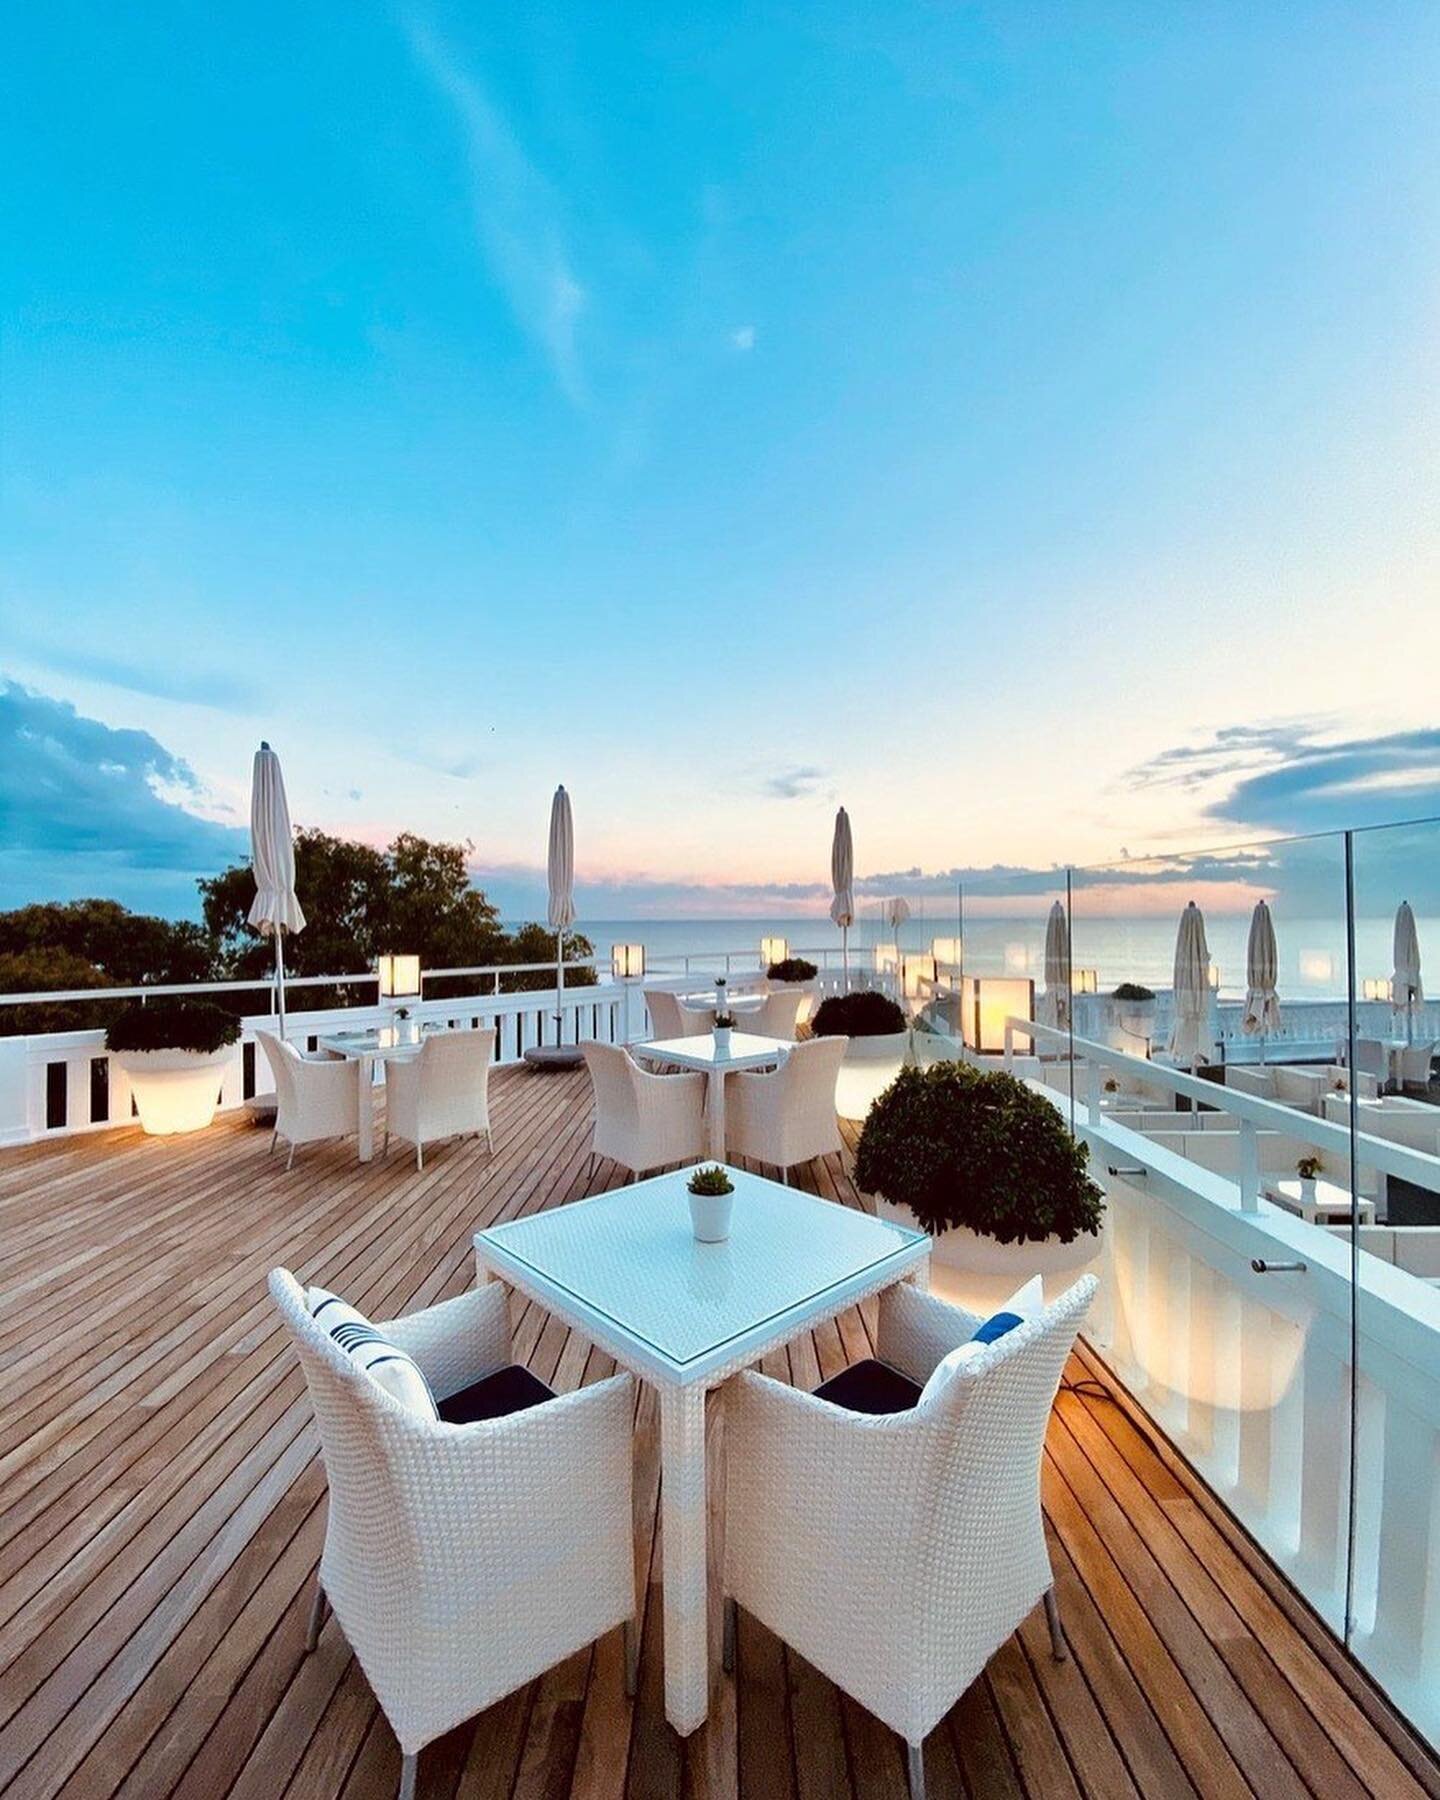 GUESS WHERE YOU CAN DINE IN A MICHELIN-STAR RESTAURANT OUTSIDE WITH THIS VIEW? 👨&zwj;🍳 Bearleaders in Food &amp; Hospitality, Michelin-star chef @joaooliveirachef, and General Manager Gon&ccedil;alo Narcisos dos Santos @gonzalonds, are your welcomi